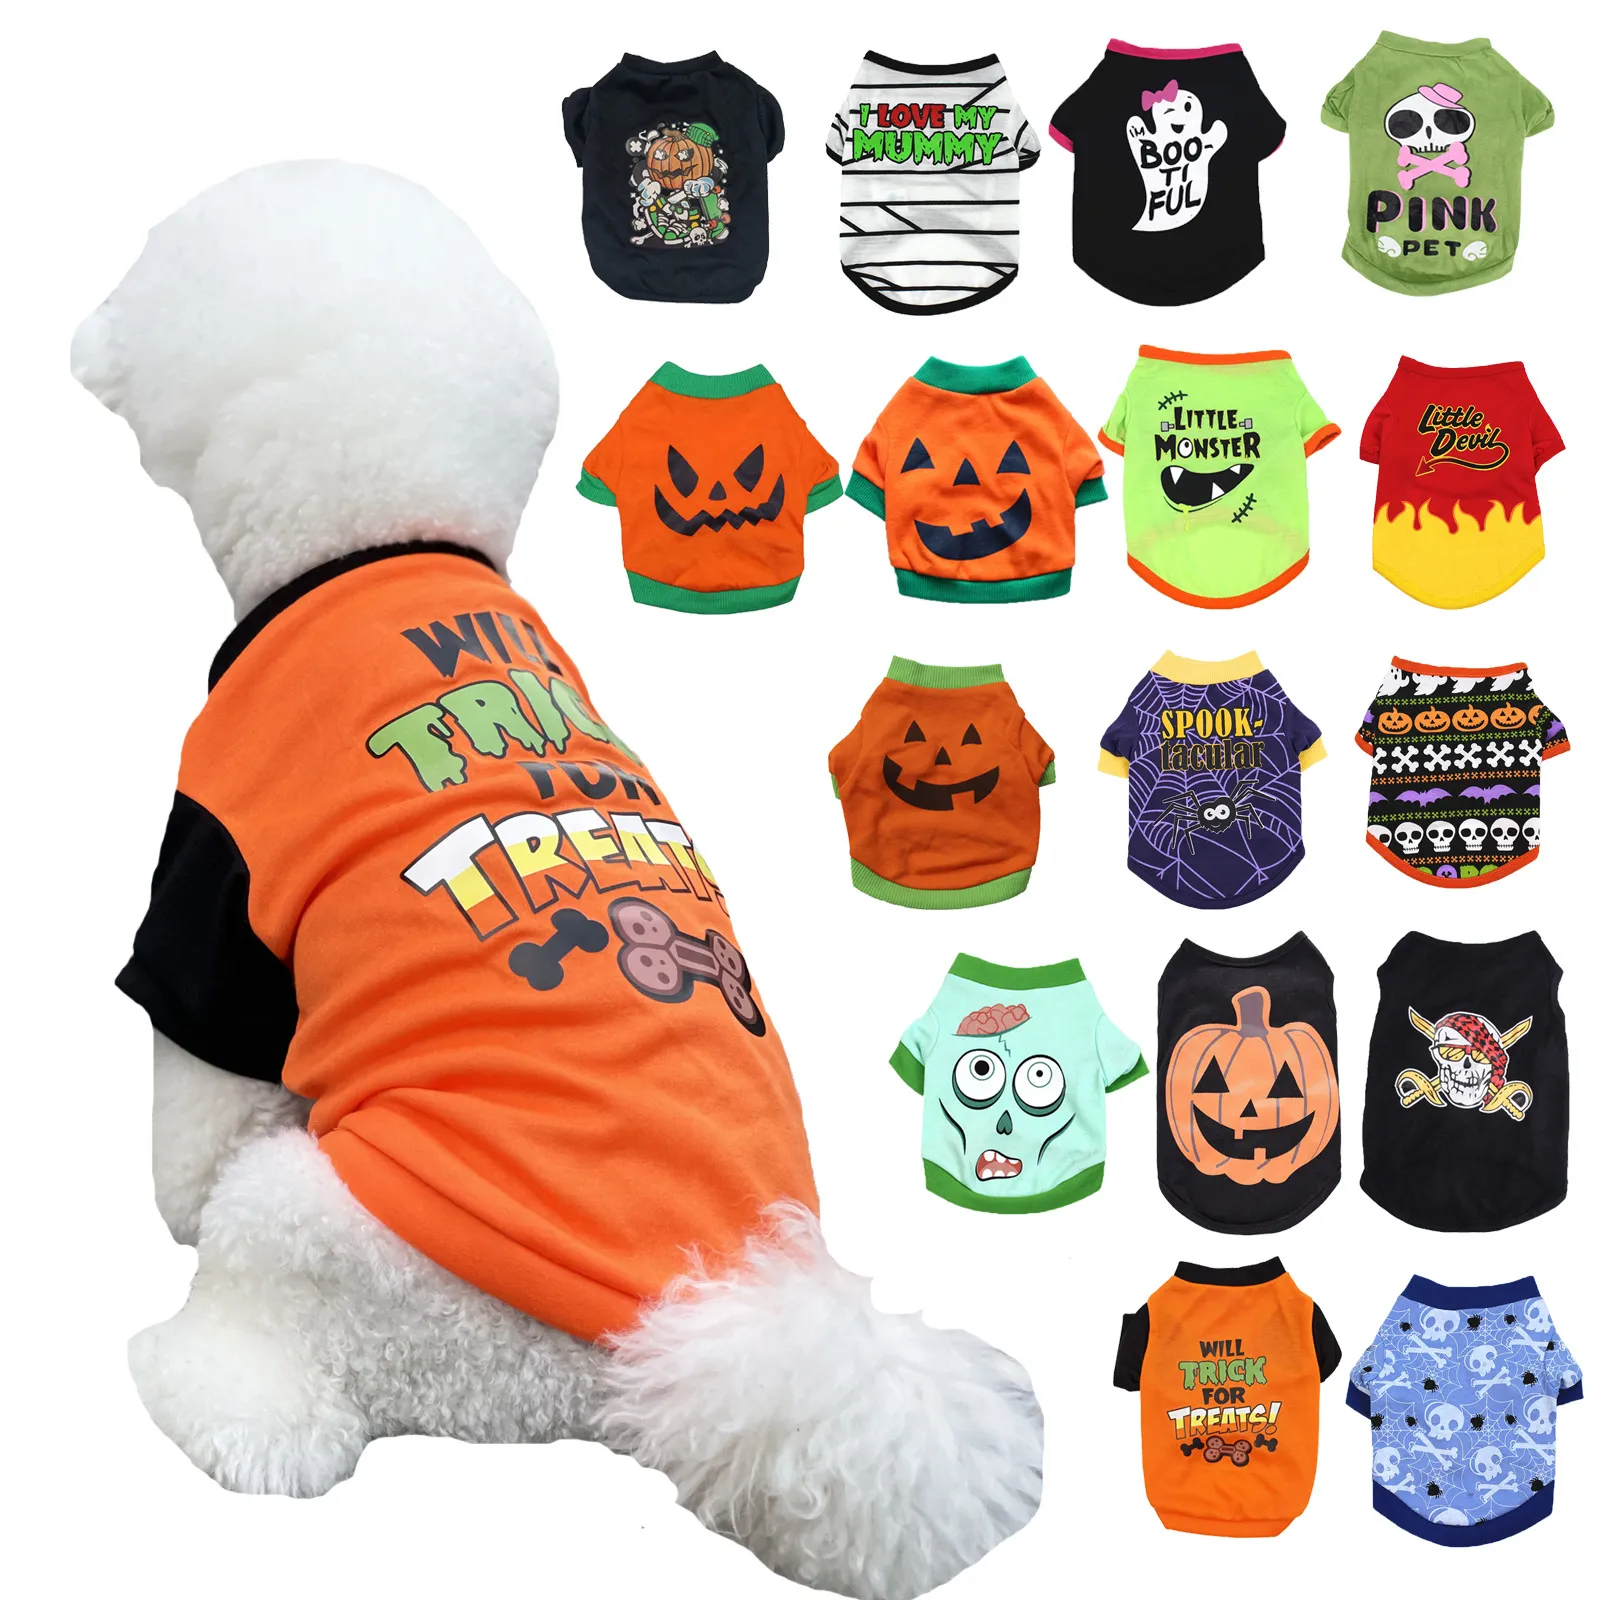 16 Color Halloween Dogs Shirt Dog Apparel Puppy Pets T-Shirt Ghost Costume Outfits Cute Pumpkin Pup Clothes for Small Doggy Cats Pet Clothing Party Cosplay A87